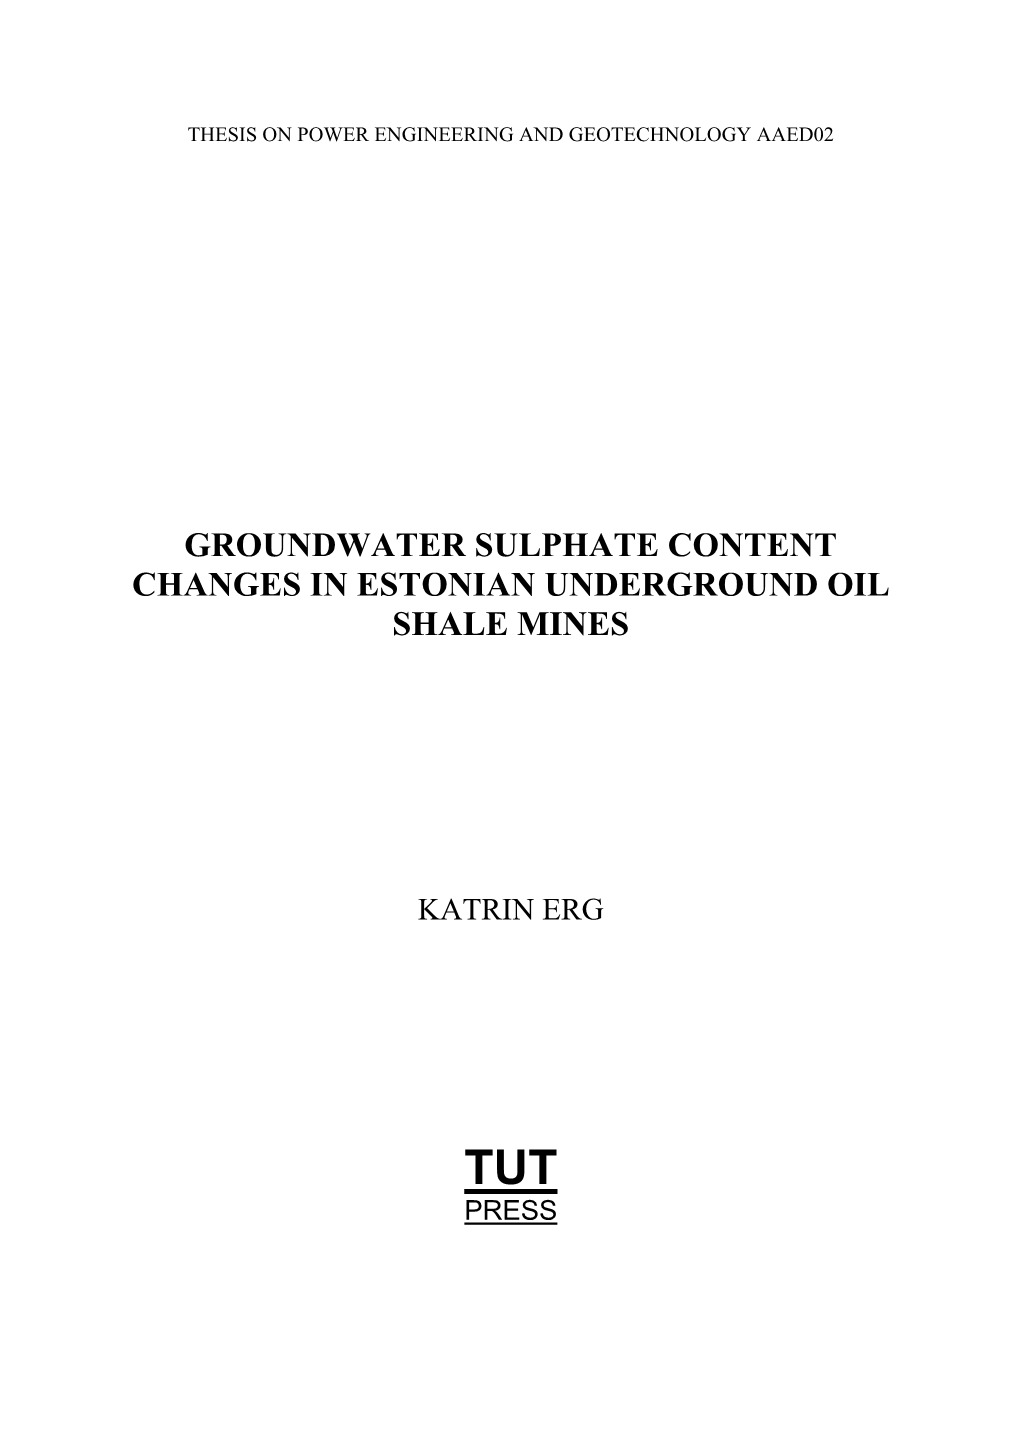 Groundwater Sulphate Content Changes in Estonian Underground Oil Shale Mines